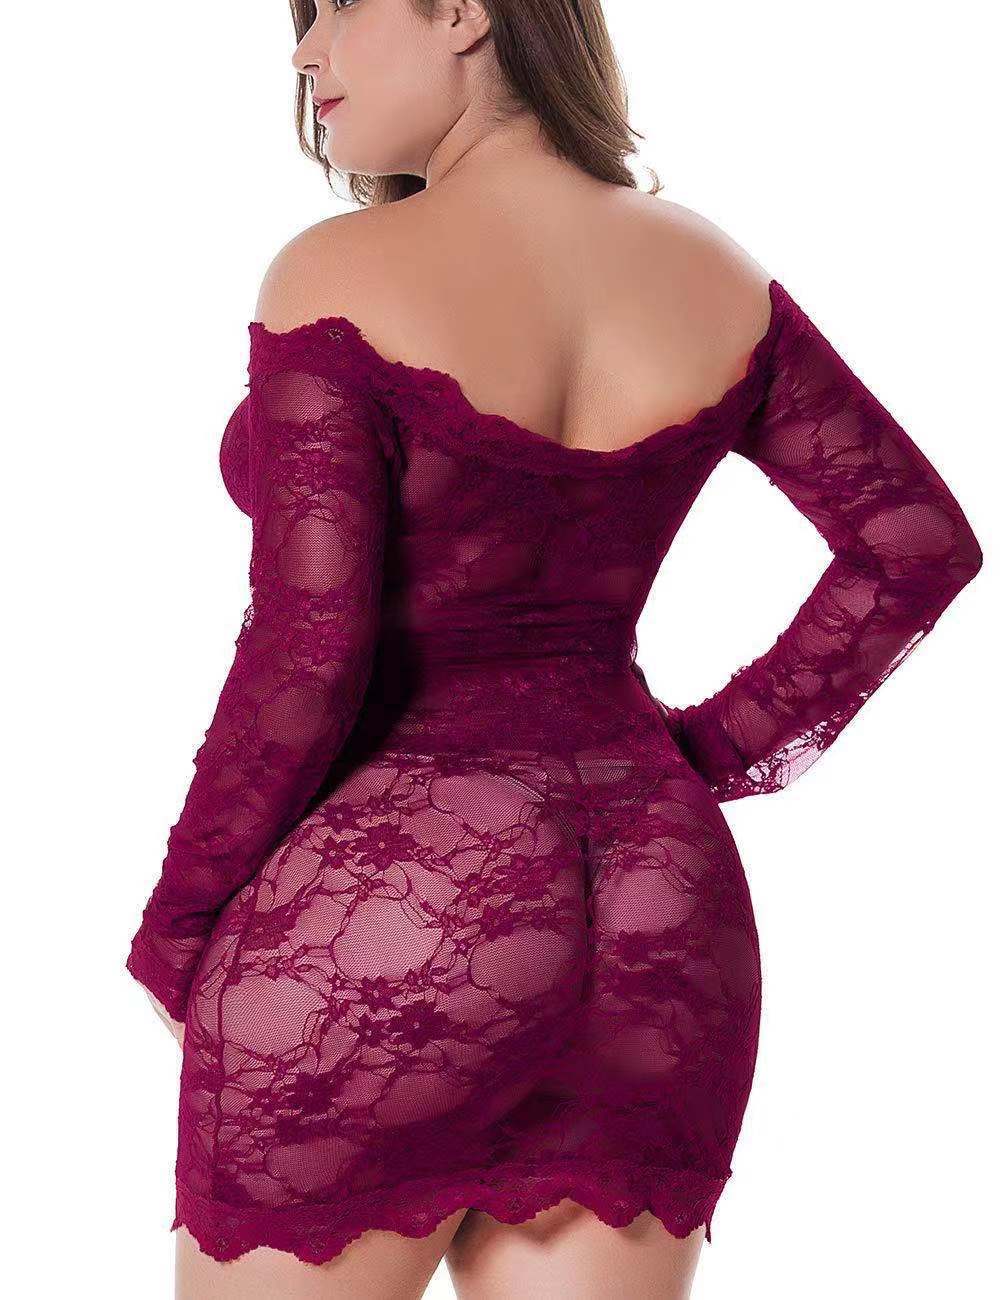 Cross-Border Sexy Lingerie Wholesale European and American Sexy Pajamas off Shoulder Dress Sheath Sexy Underwear D118